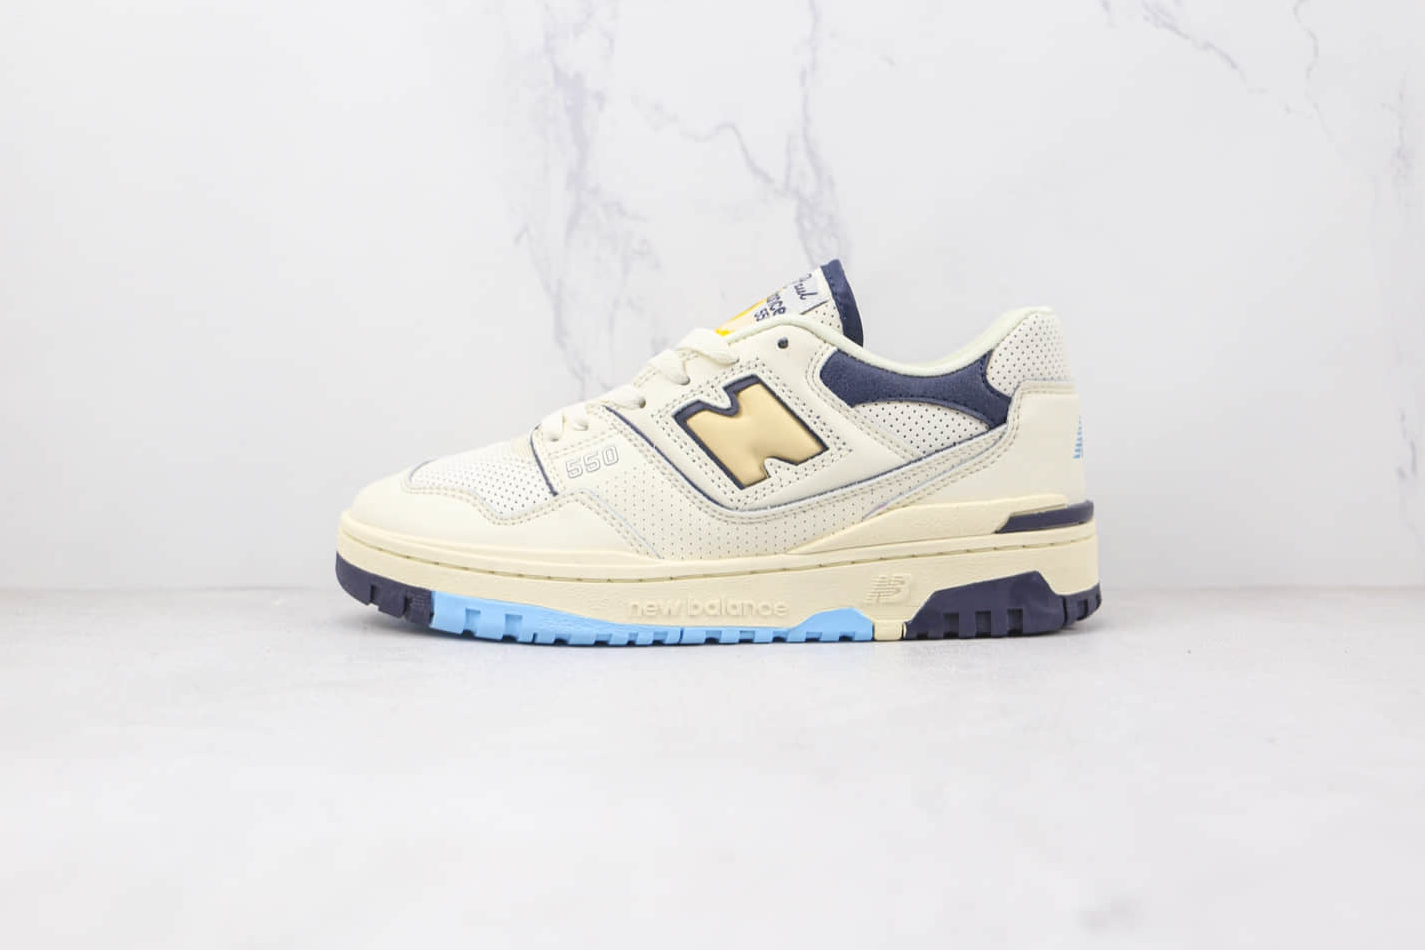 New Balance 550 x Rich Paul: An Iconic Collaboration for Authentic Style